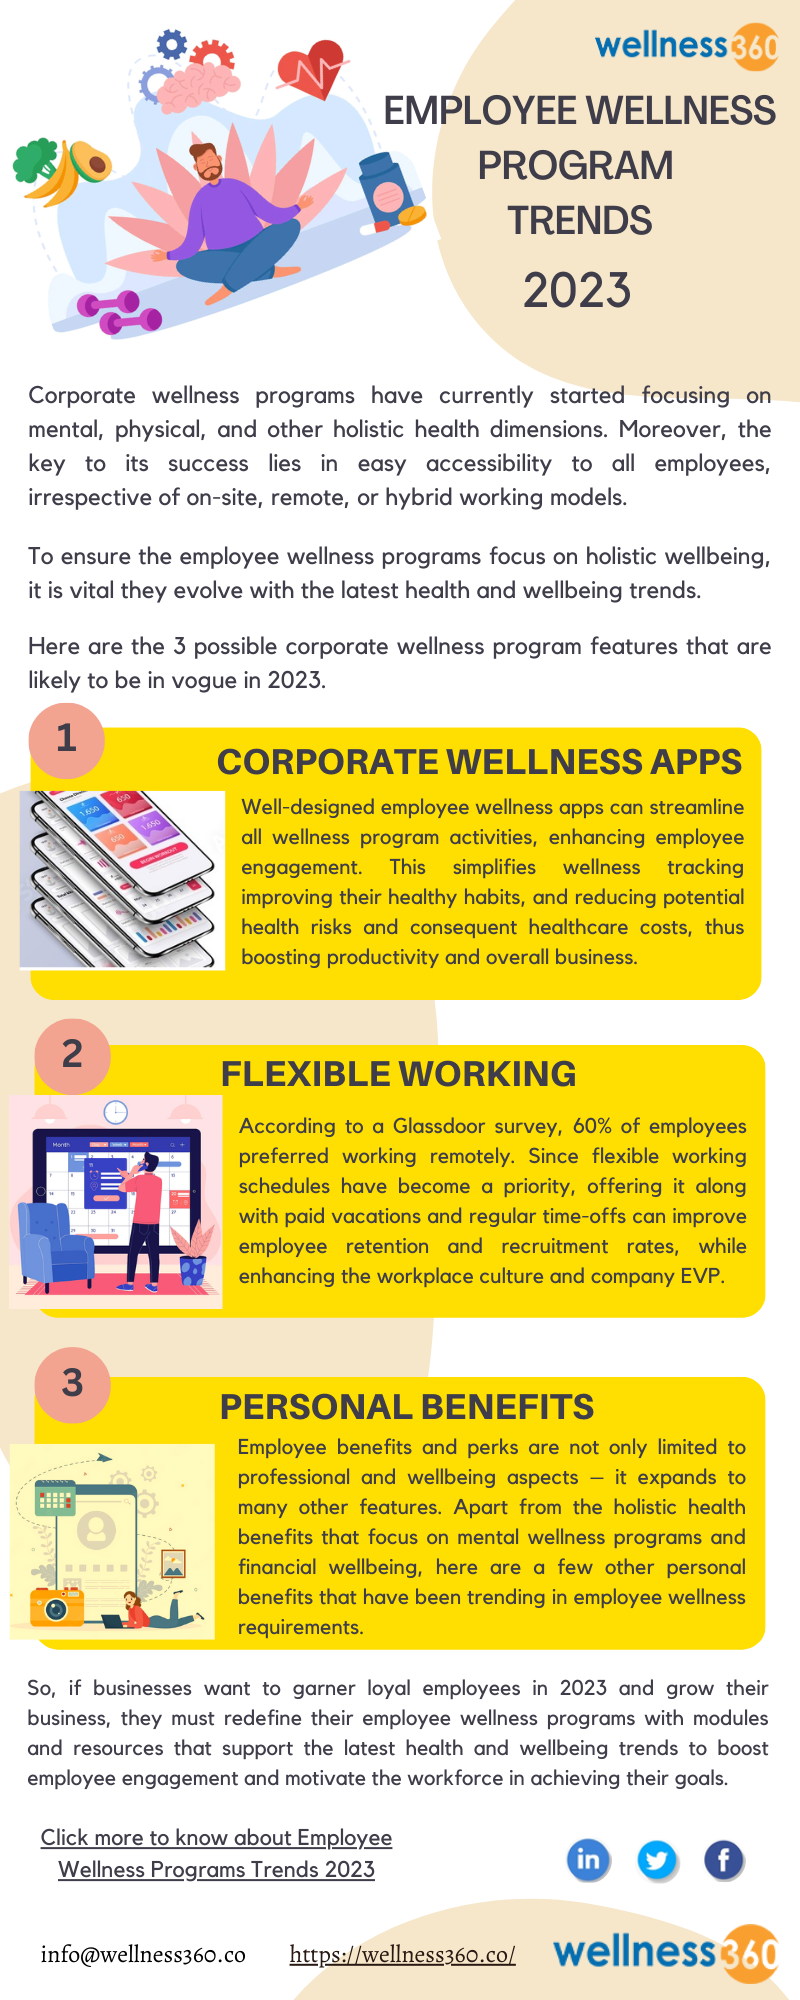 Rethink™ Relaunches Whil™ Platform for Employee Wellbeing